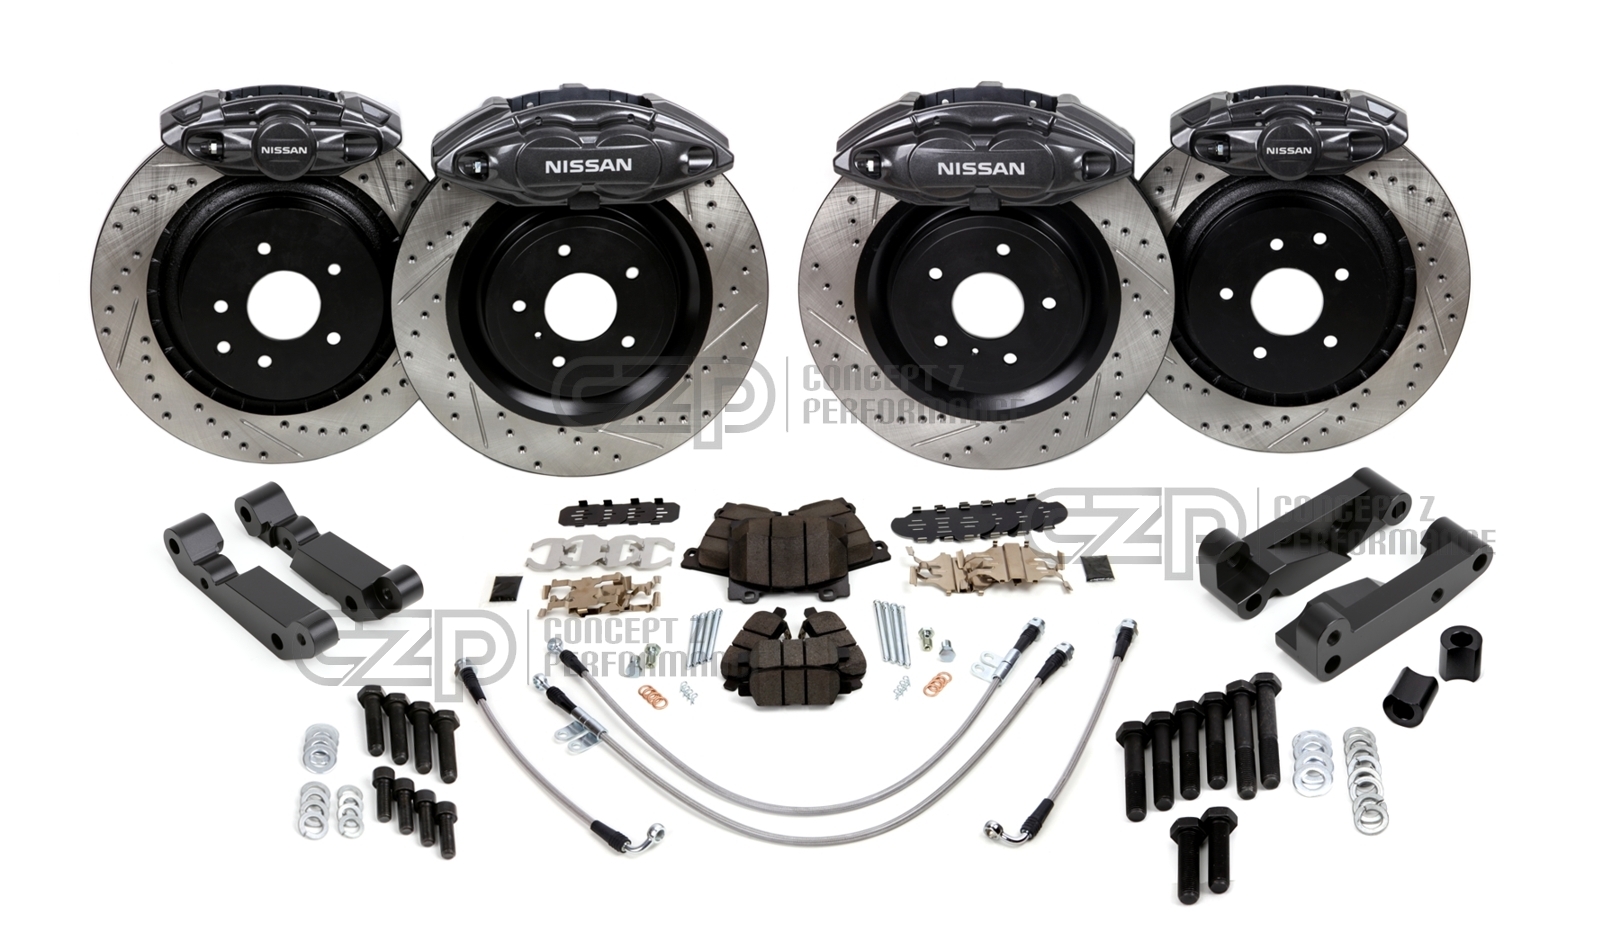 Akebono Nissan 240SX Front and Rear 14" Big Brake Upgrade Kit 89-98 S13 S14 S15